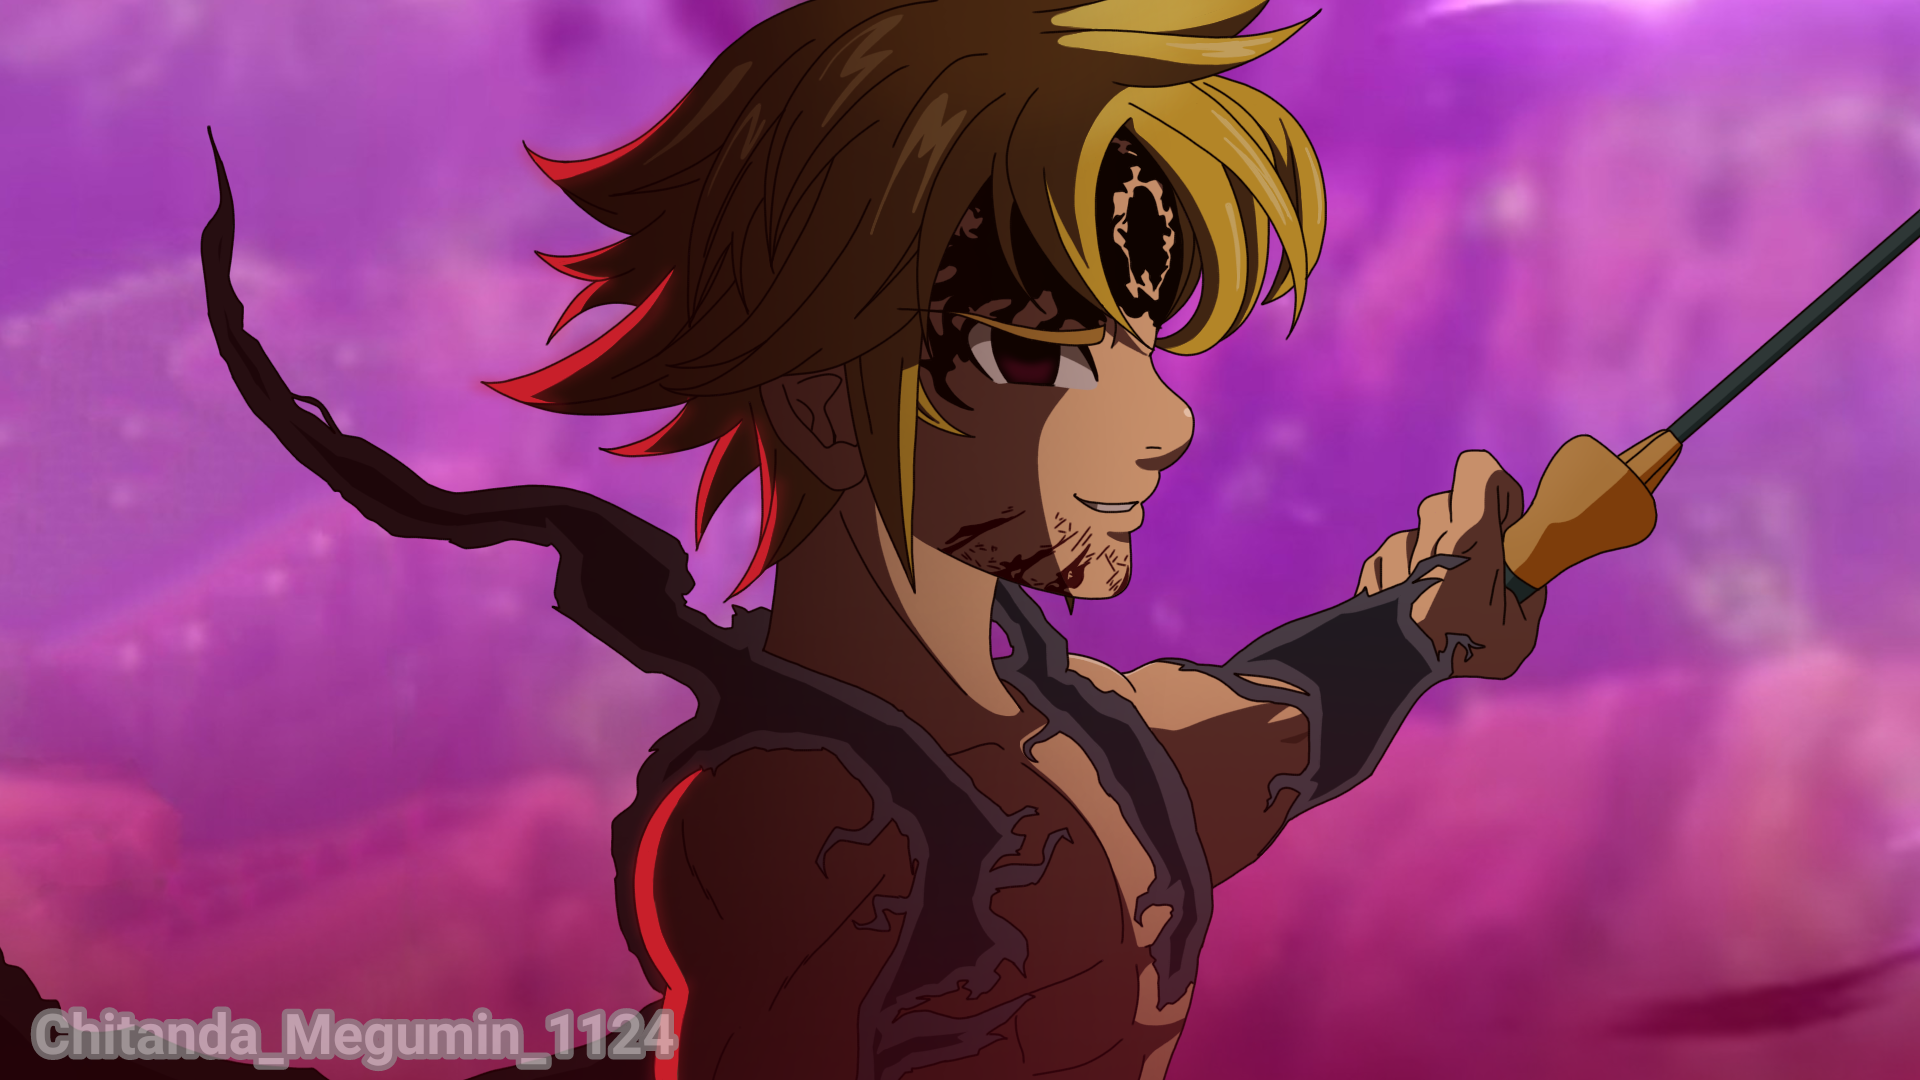 Anime The Seven Deadly Sins HD Wallpaper by Trazo17